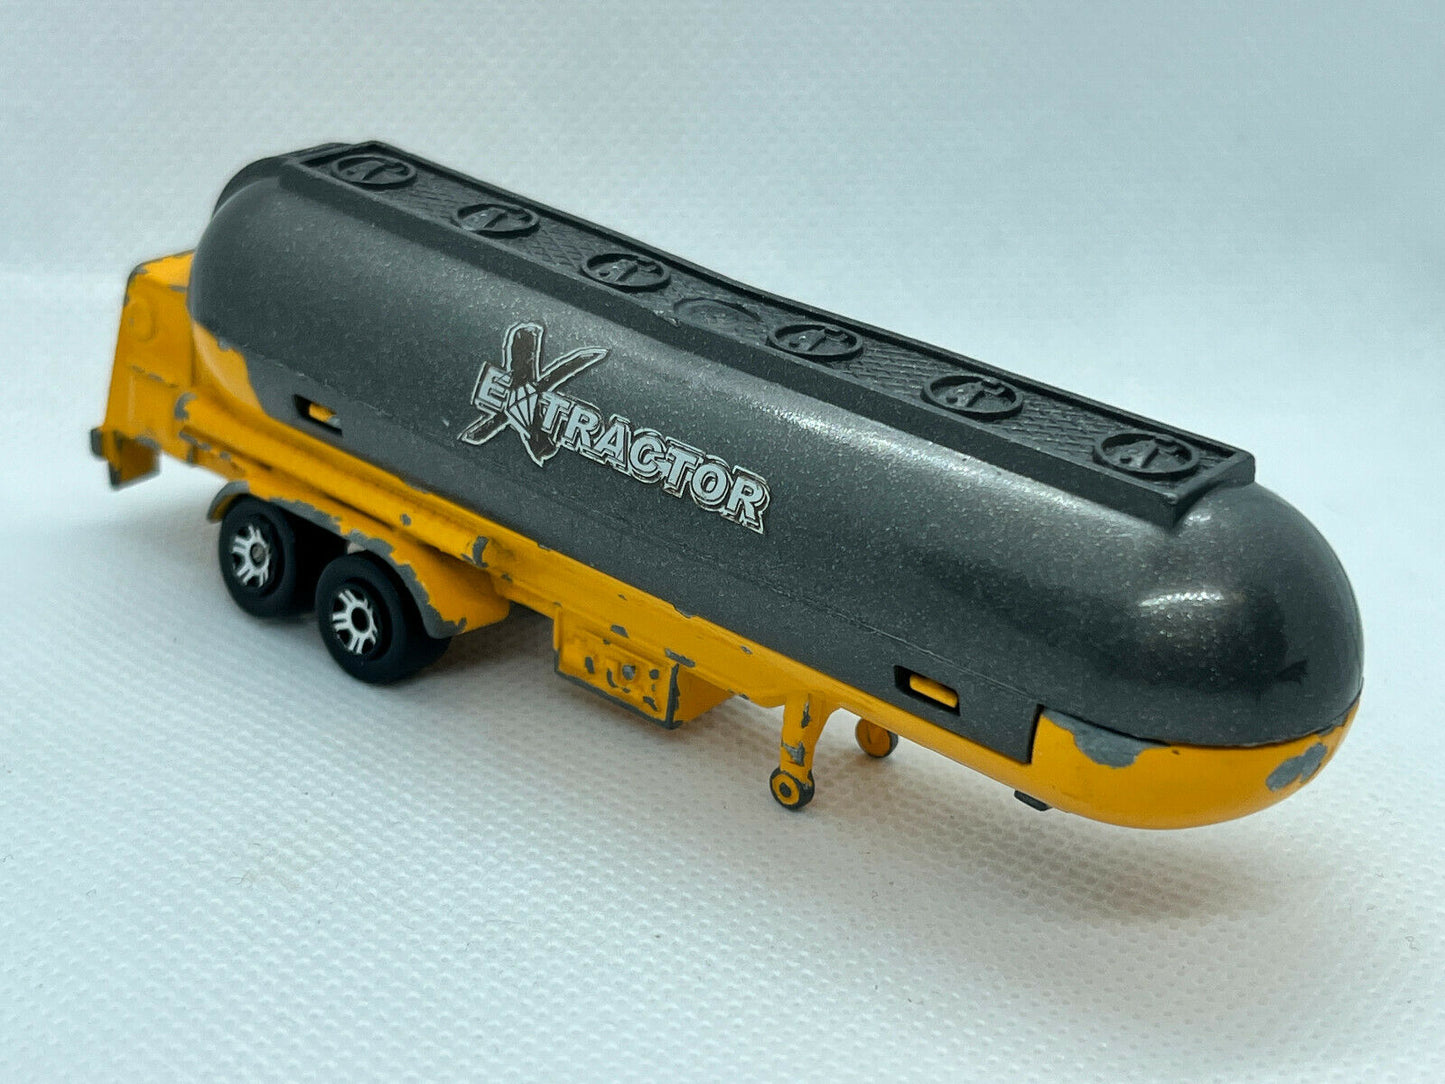 Majorette "Extractor Set" Volvo N.324 1:100 Rear cab only